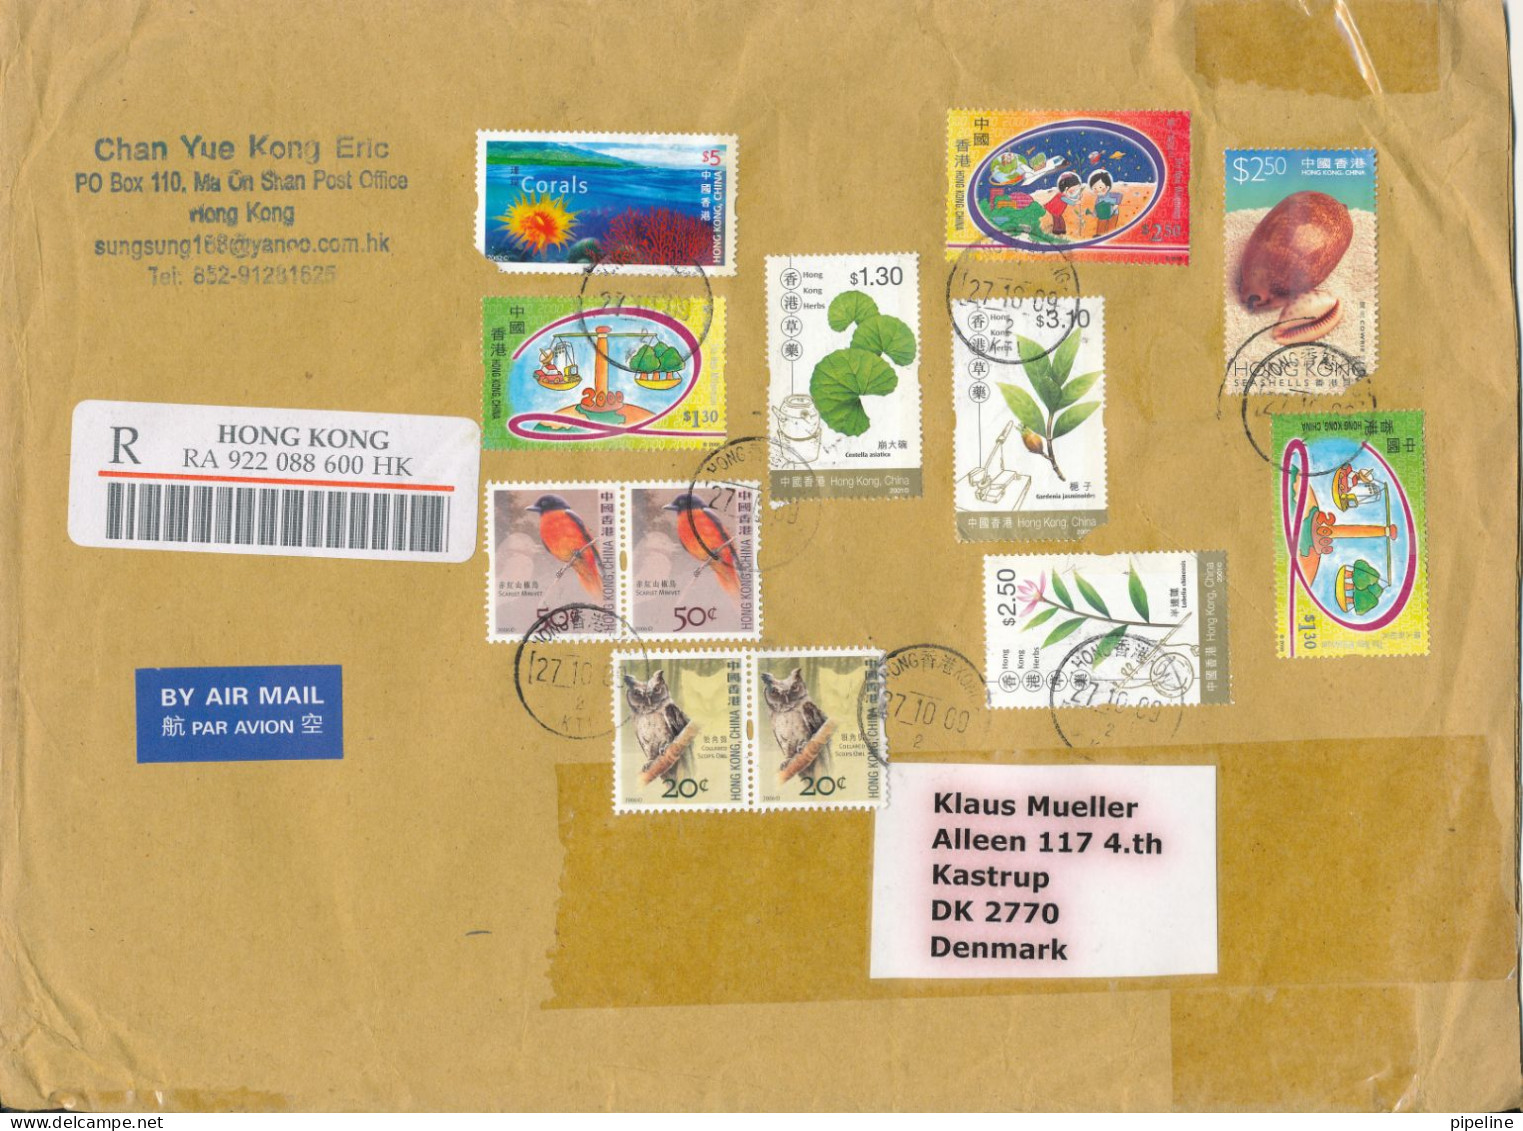 Hong Kong Registered Cover Sent Air Mail To Denmark 27-10-2009 Topic Stamps Big Size Cover 2 Stamps Are Damaged - Briefe U. Dokumente